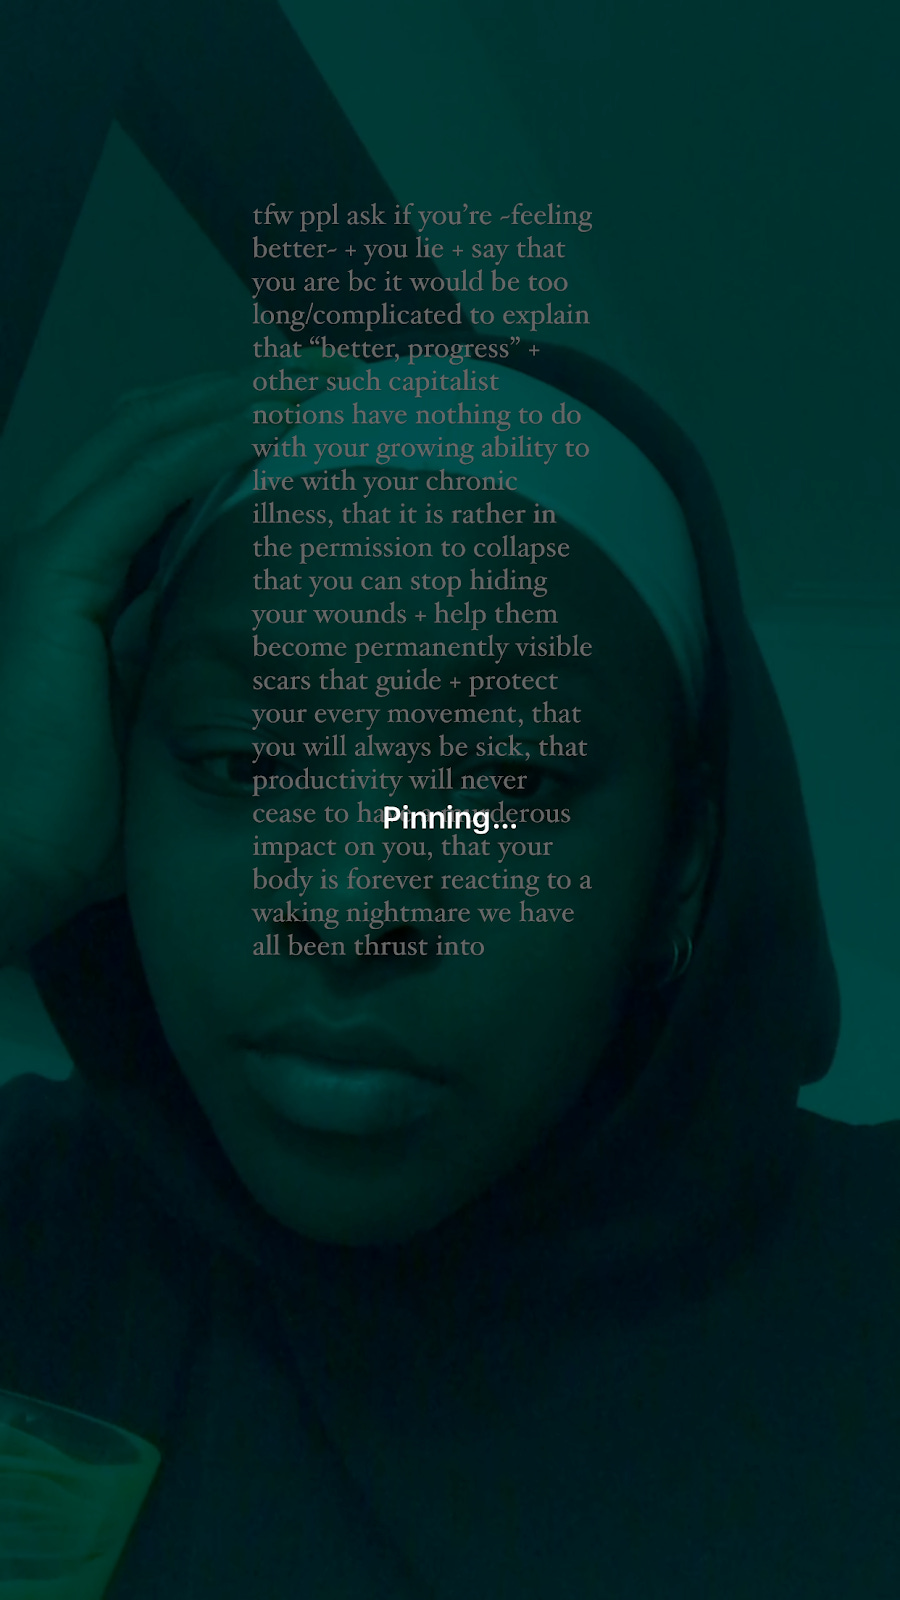 a black and white image of me, a black queer person in a white durag and black hoodie, with a green filter and a text overlay. the text overlay reads: “tfw ppl ask if you're ~feeling better~ + you lie + say that you are bc it would be too long/complicated to explain that "better, progress" + other such capitalist notions have nothing to do with your growing ability to live with your chronic illness, that it is rather in the permission to collapse that you can stop hiding your wounds + help them become permanently visible scars that guide + protect your every movement, that you will always be sick, that productivity will never cease to have a perilous impact on you, that your body is forever reacting to a waking nightmare we have all been thrust into”